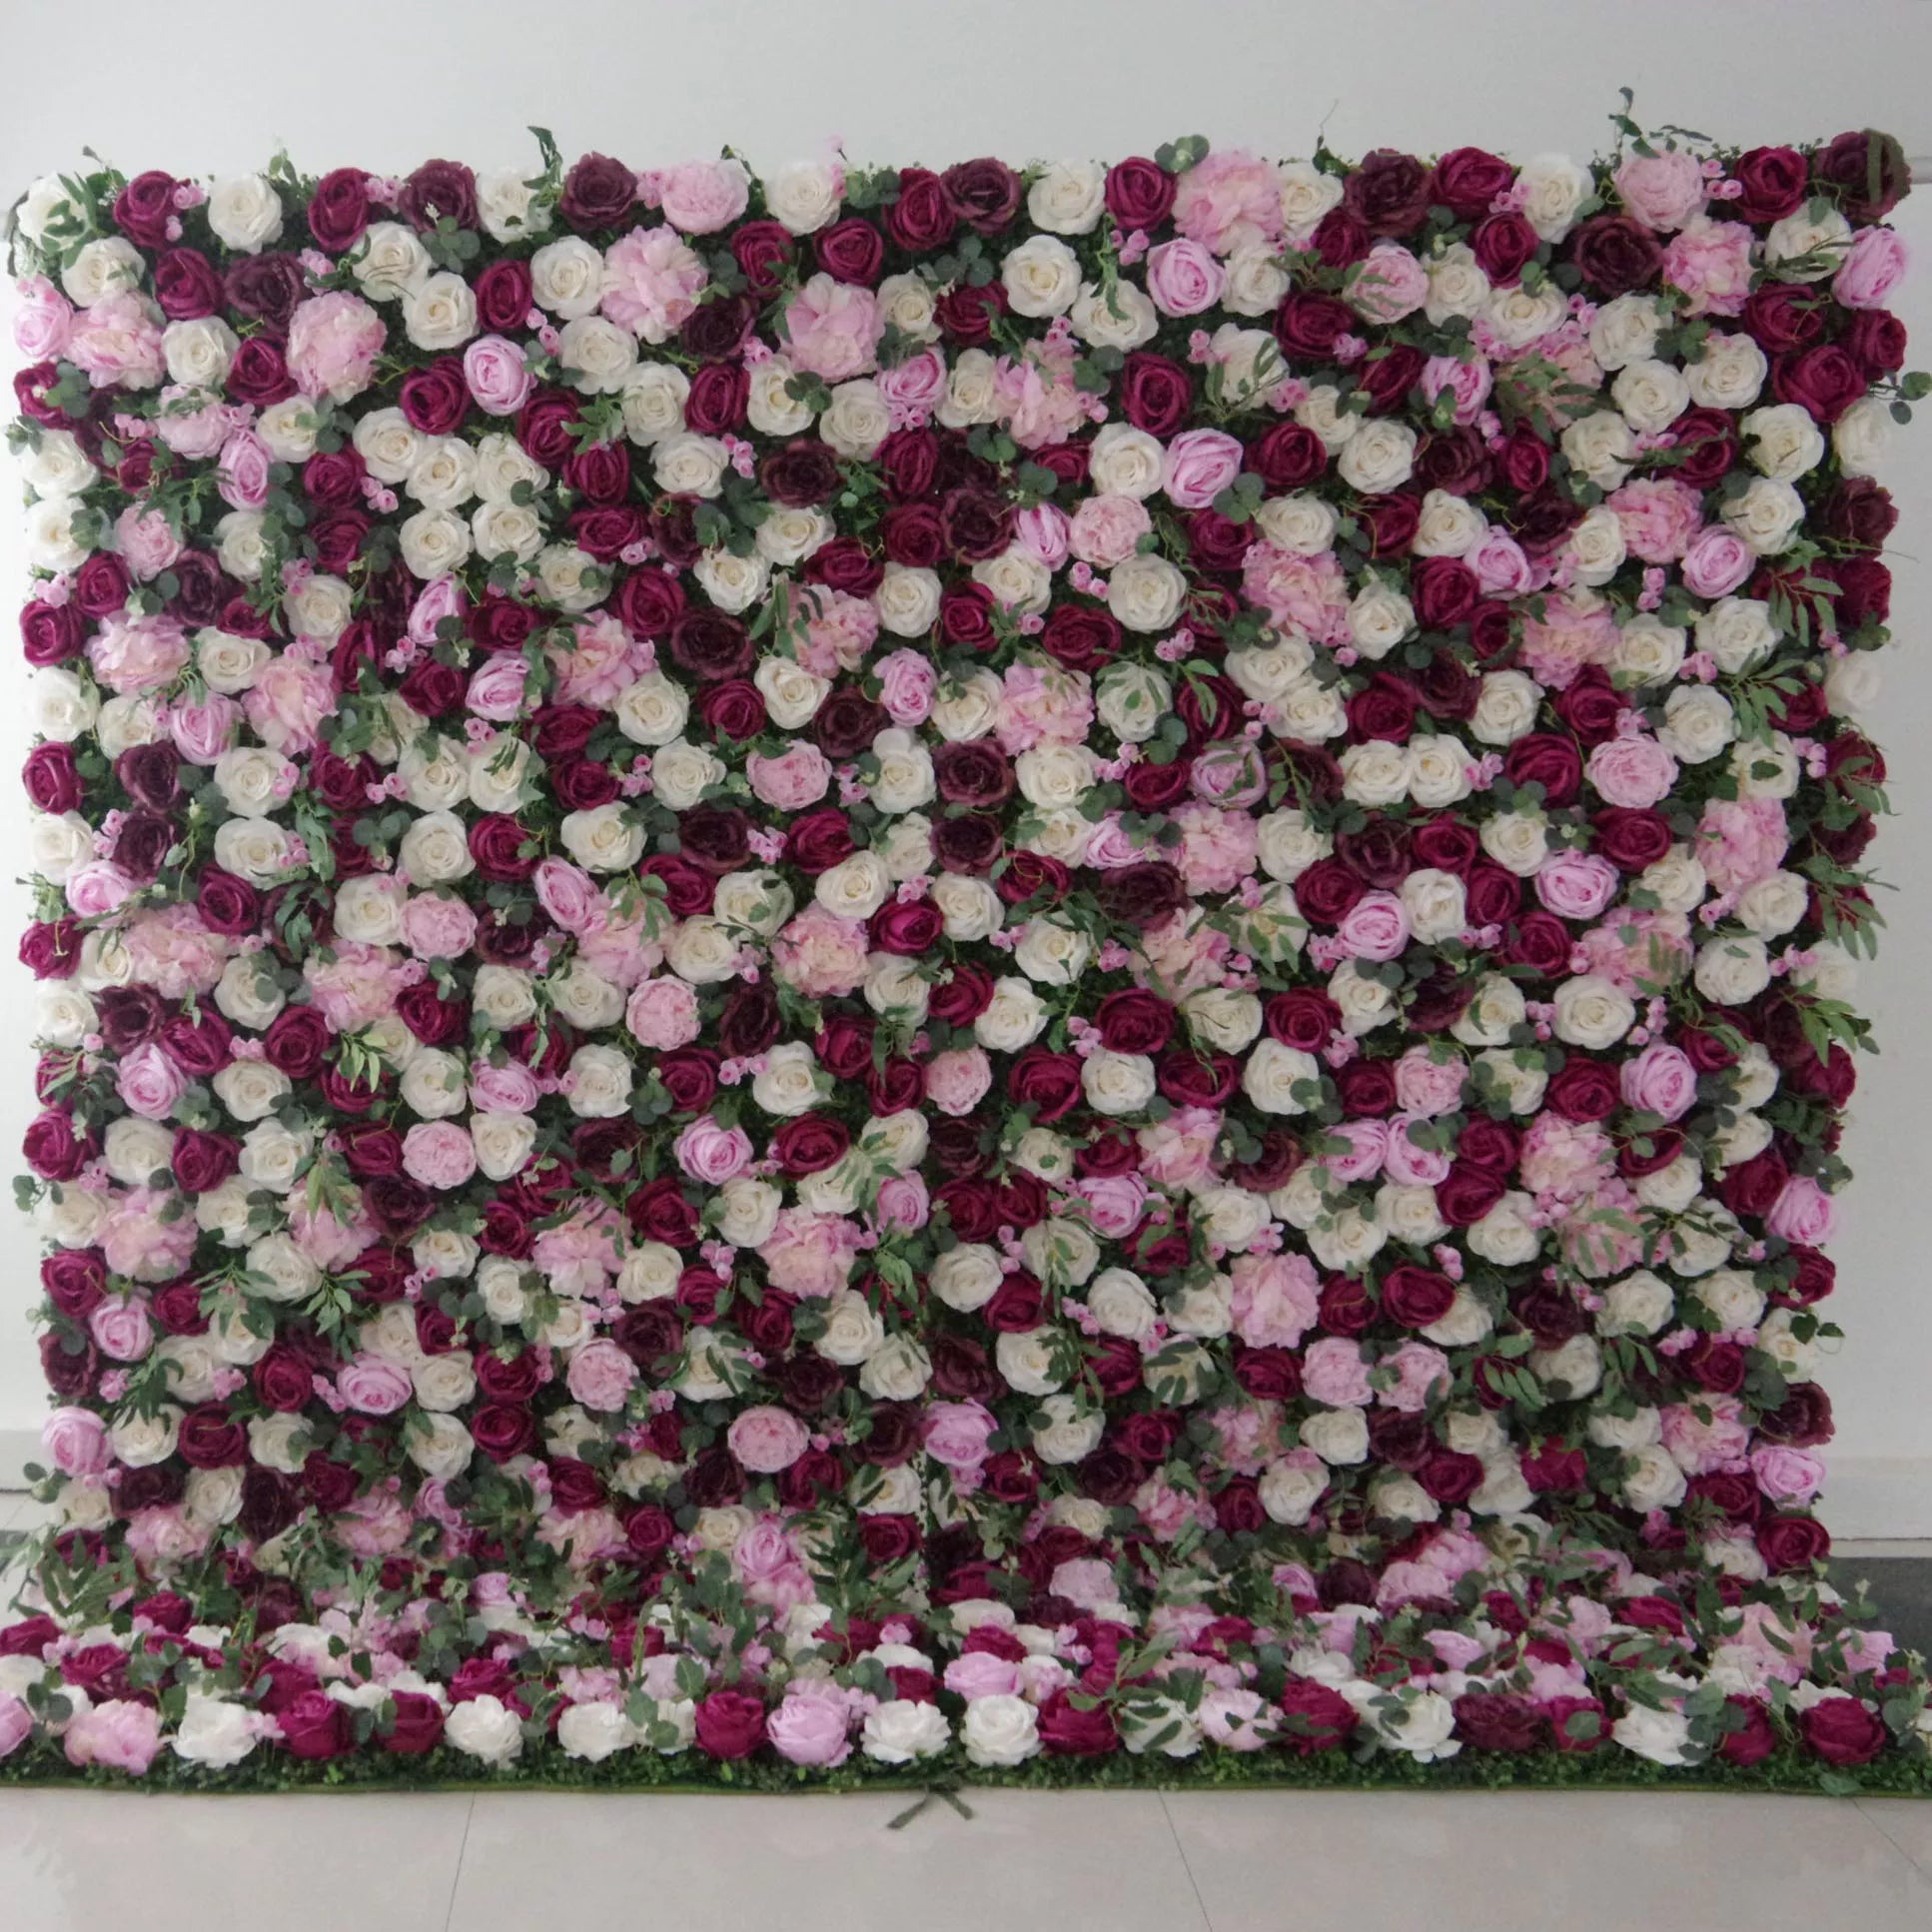 Valar Flowers Roll Up Fabric Artificial Mixed Pinky and Purple and White Floral Wall Wedding Backdrop, Floral Party Decor, Event Photography-VF-091